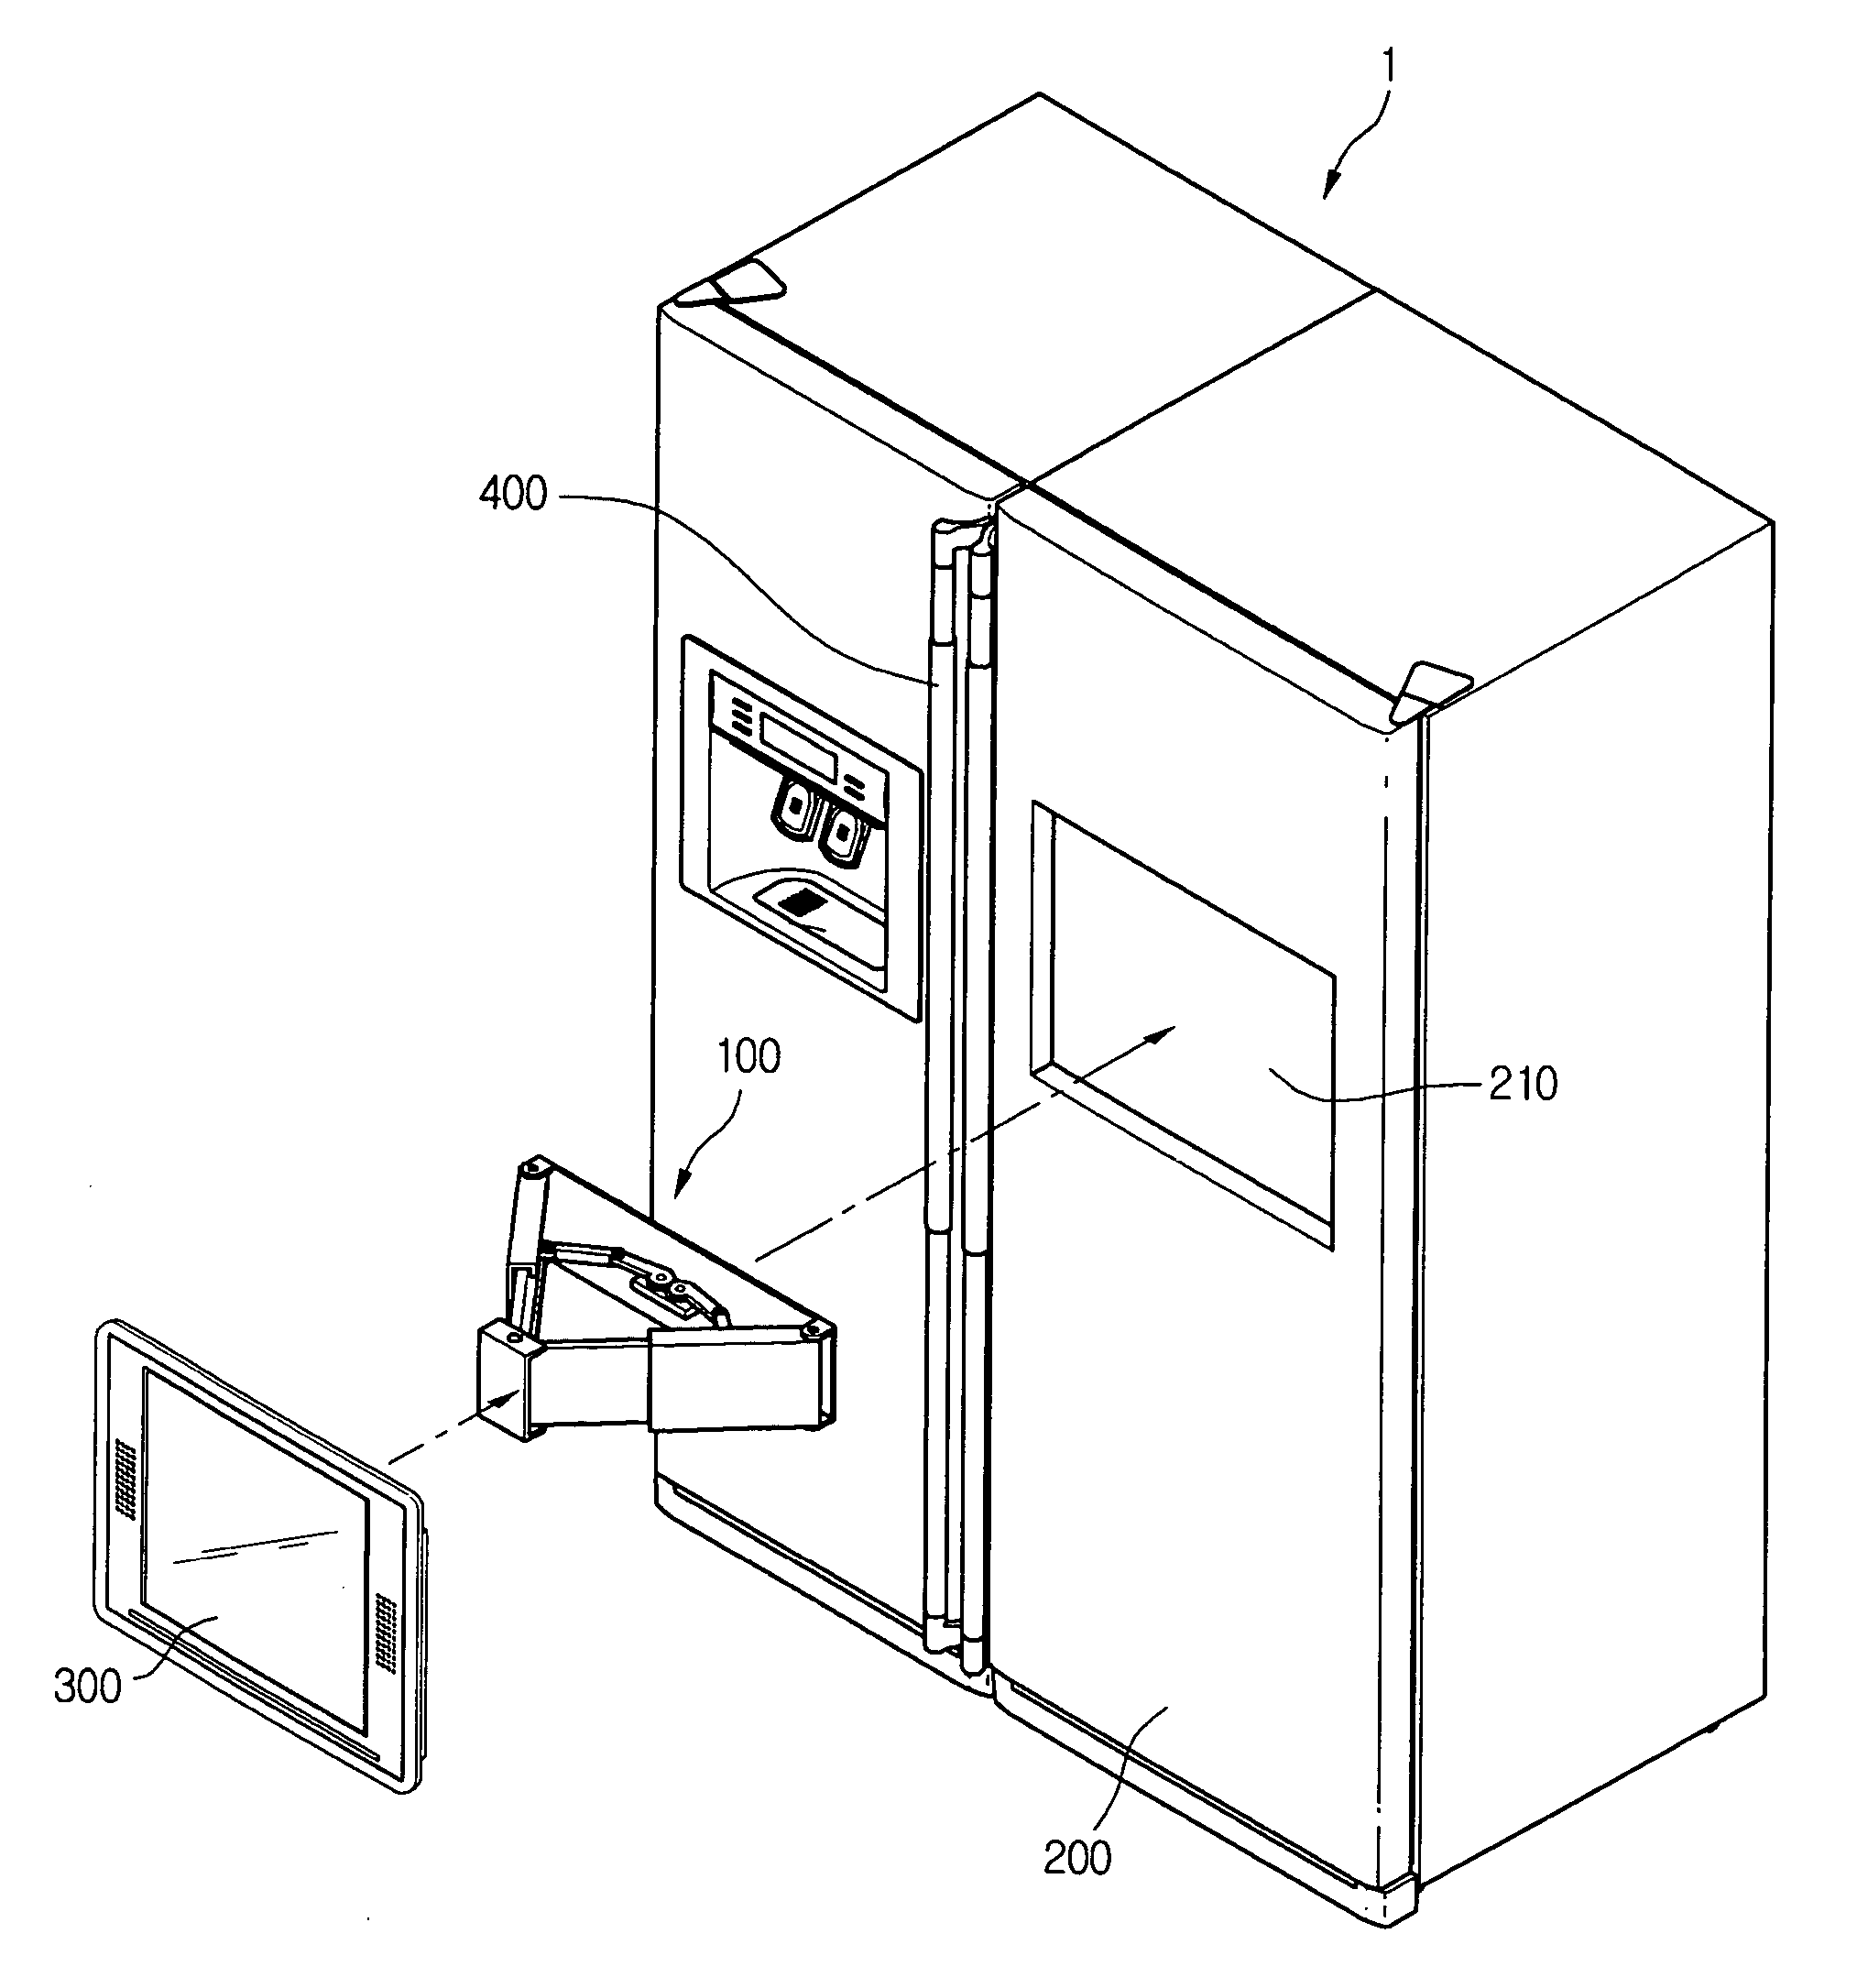 Refrigerator and guide apparatus for display of refrigerator